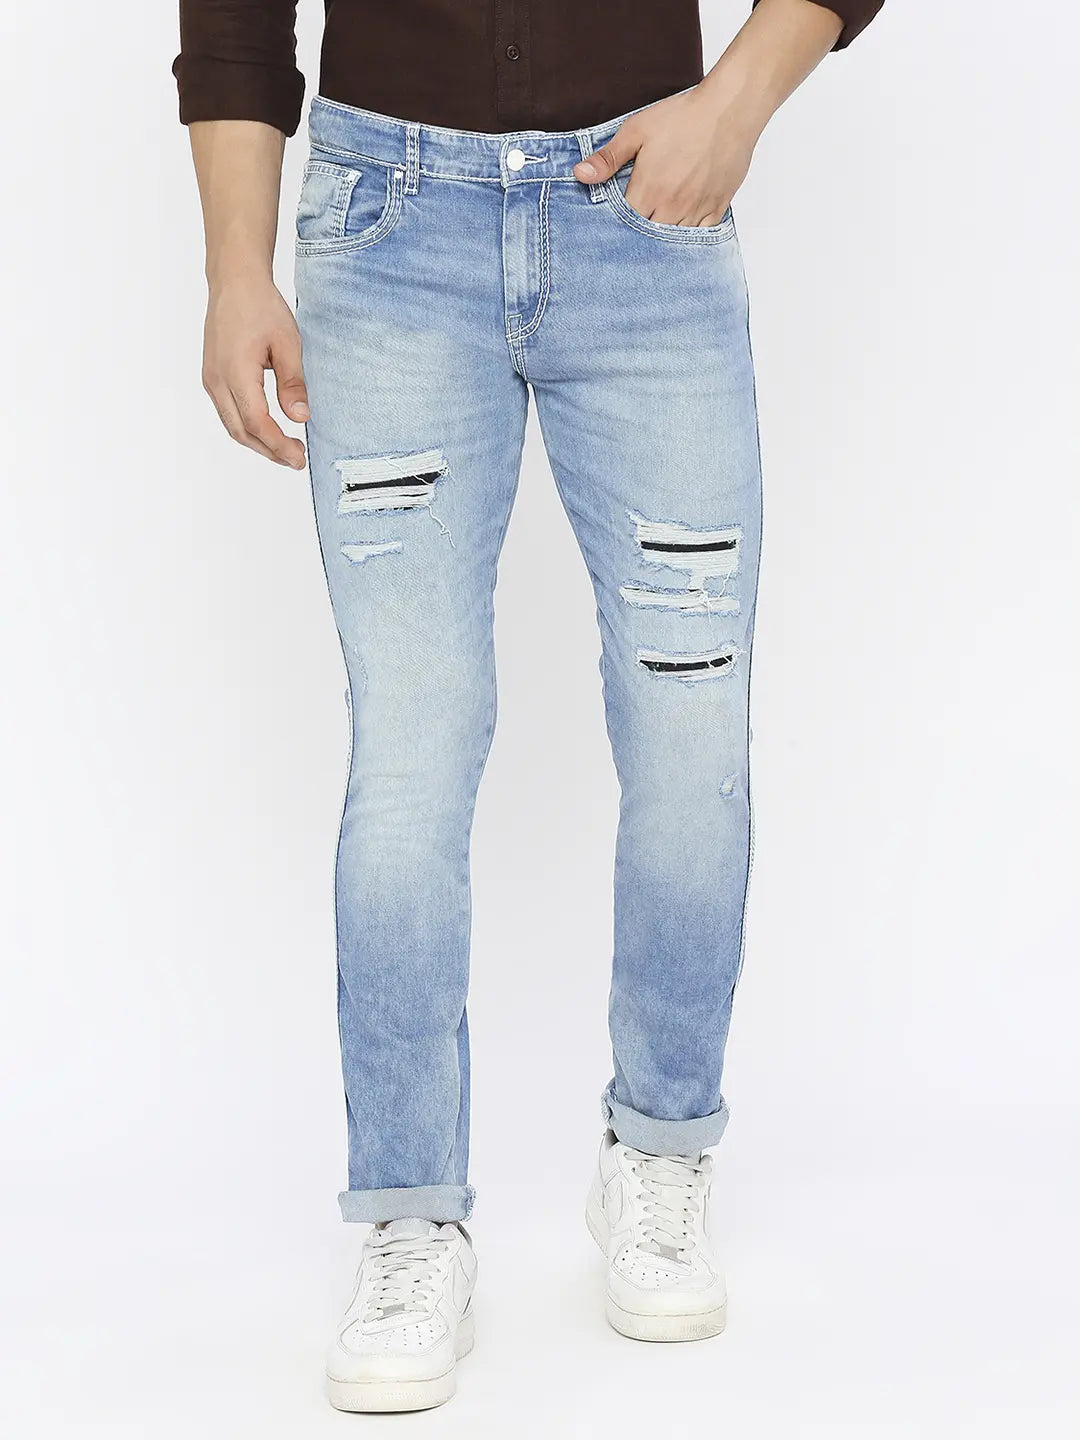 Buy Gray Slim Fit Ripped Jeans by GentWith.com | Worldwide Shipping